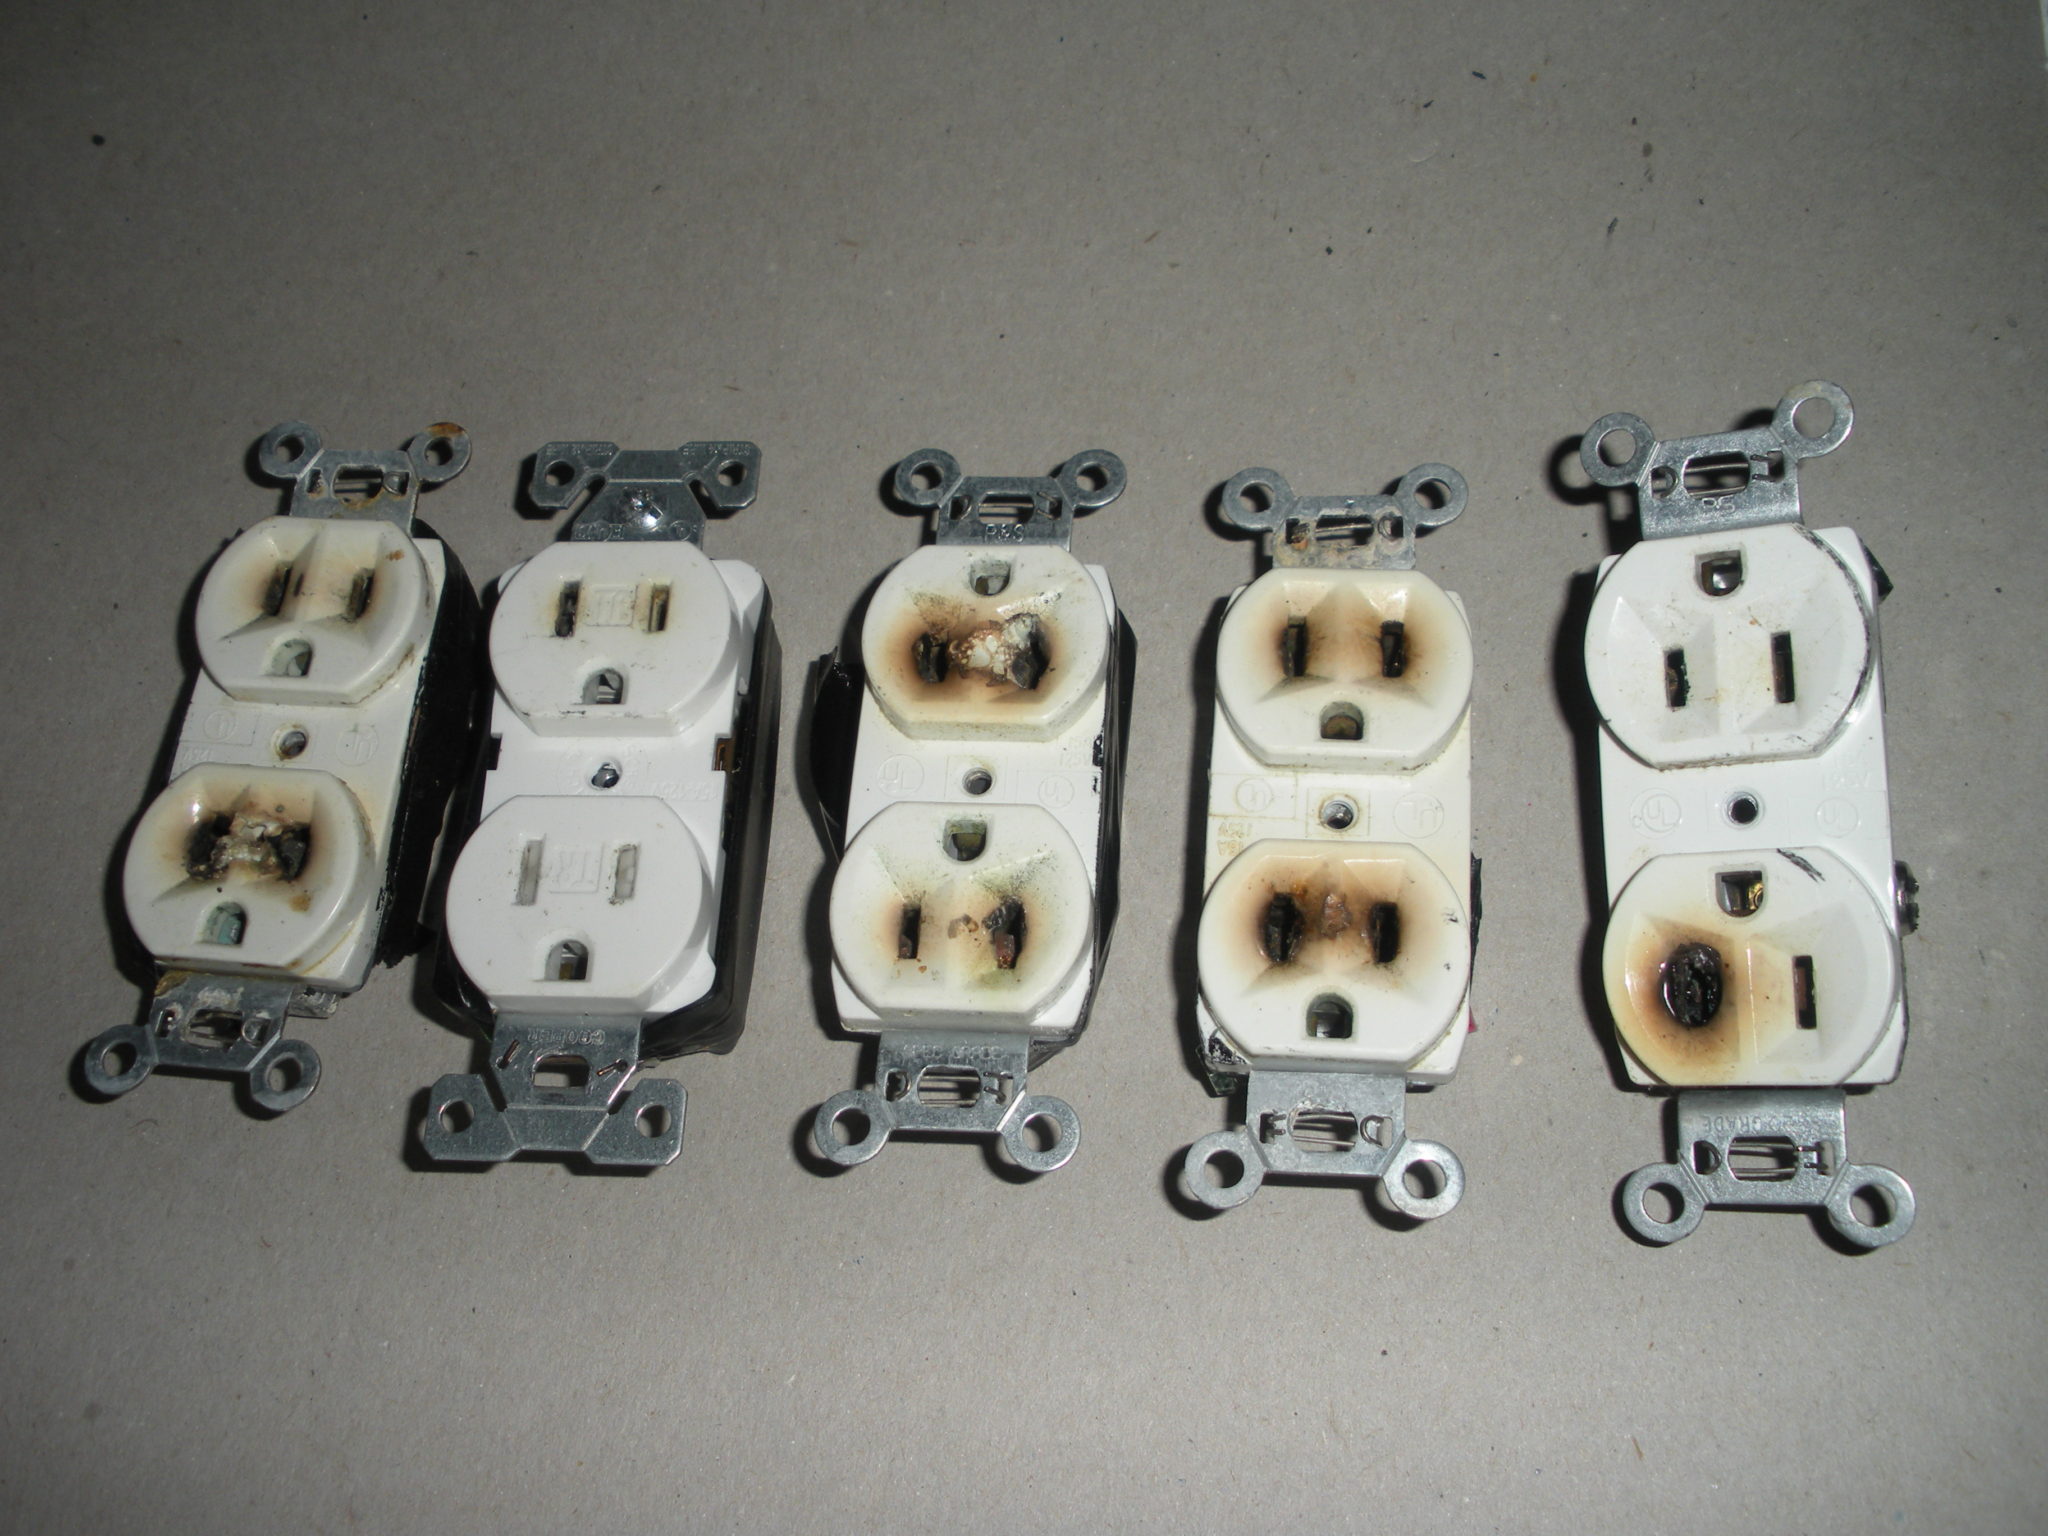 Surge Protectors and Home Safety from Surges